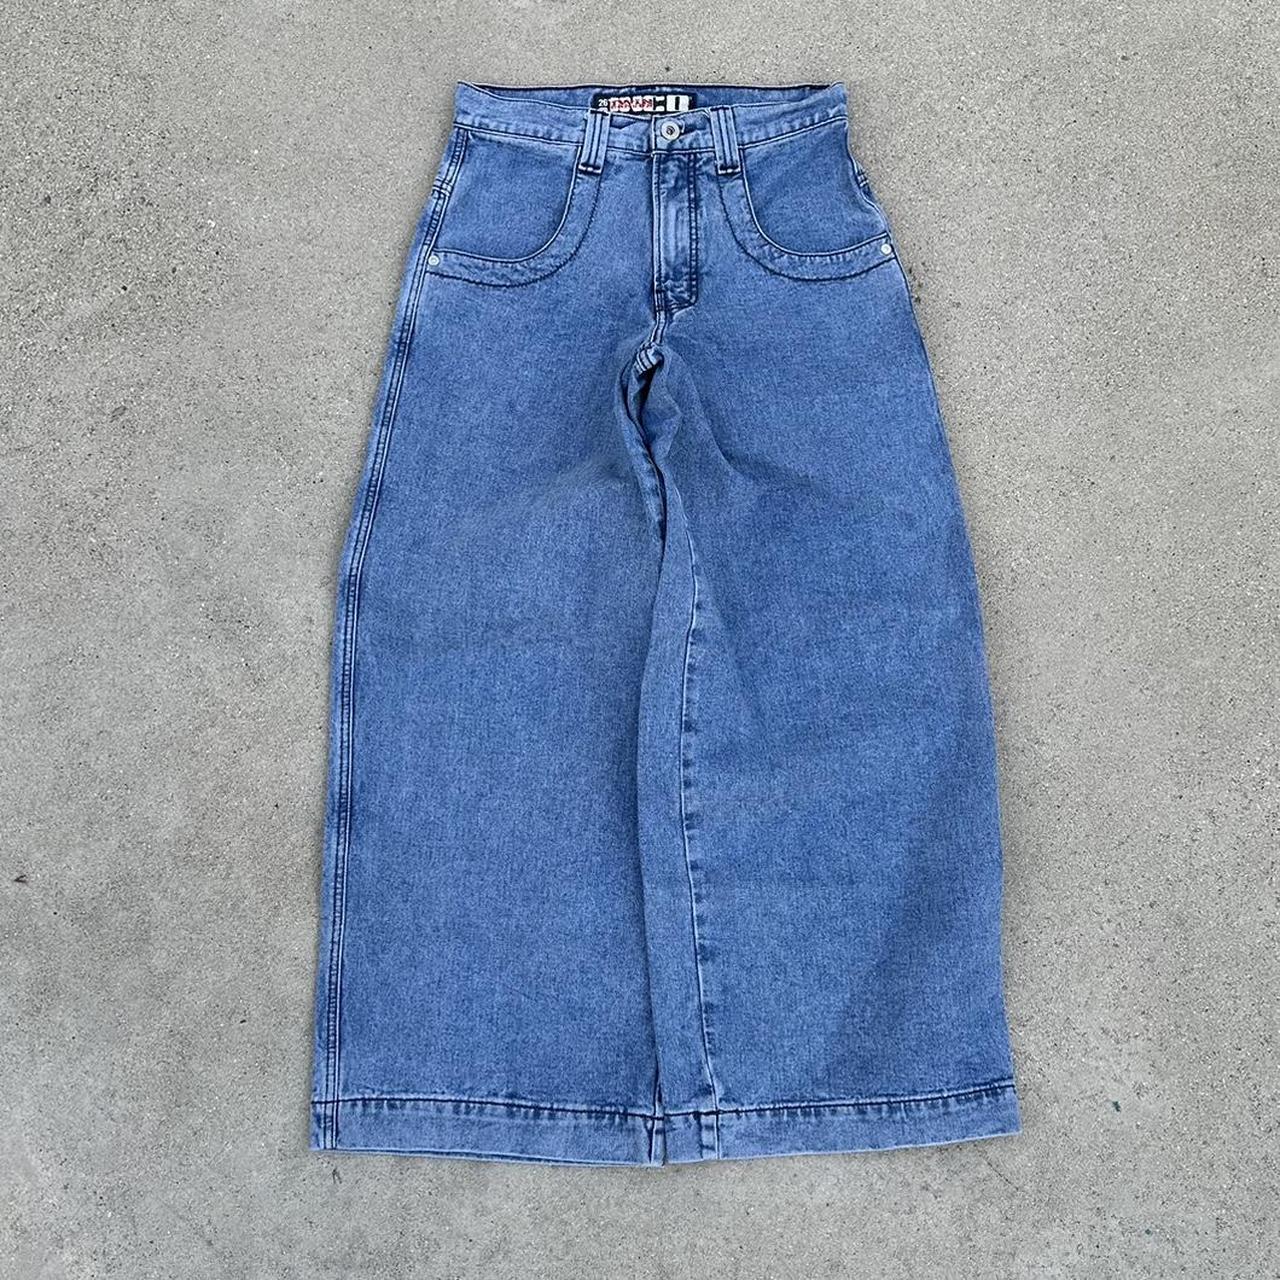 jnco antique jeans worn like 2x but no flaws... - Depop